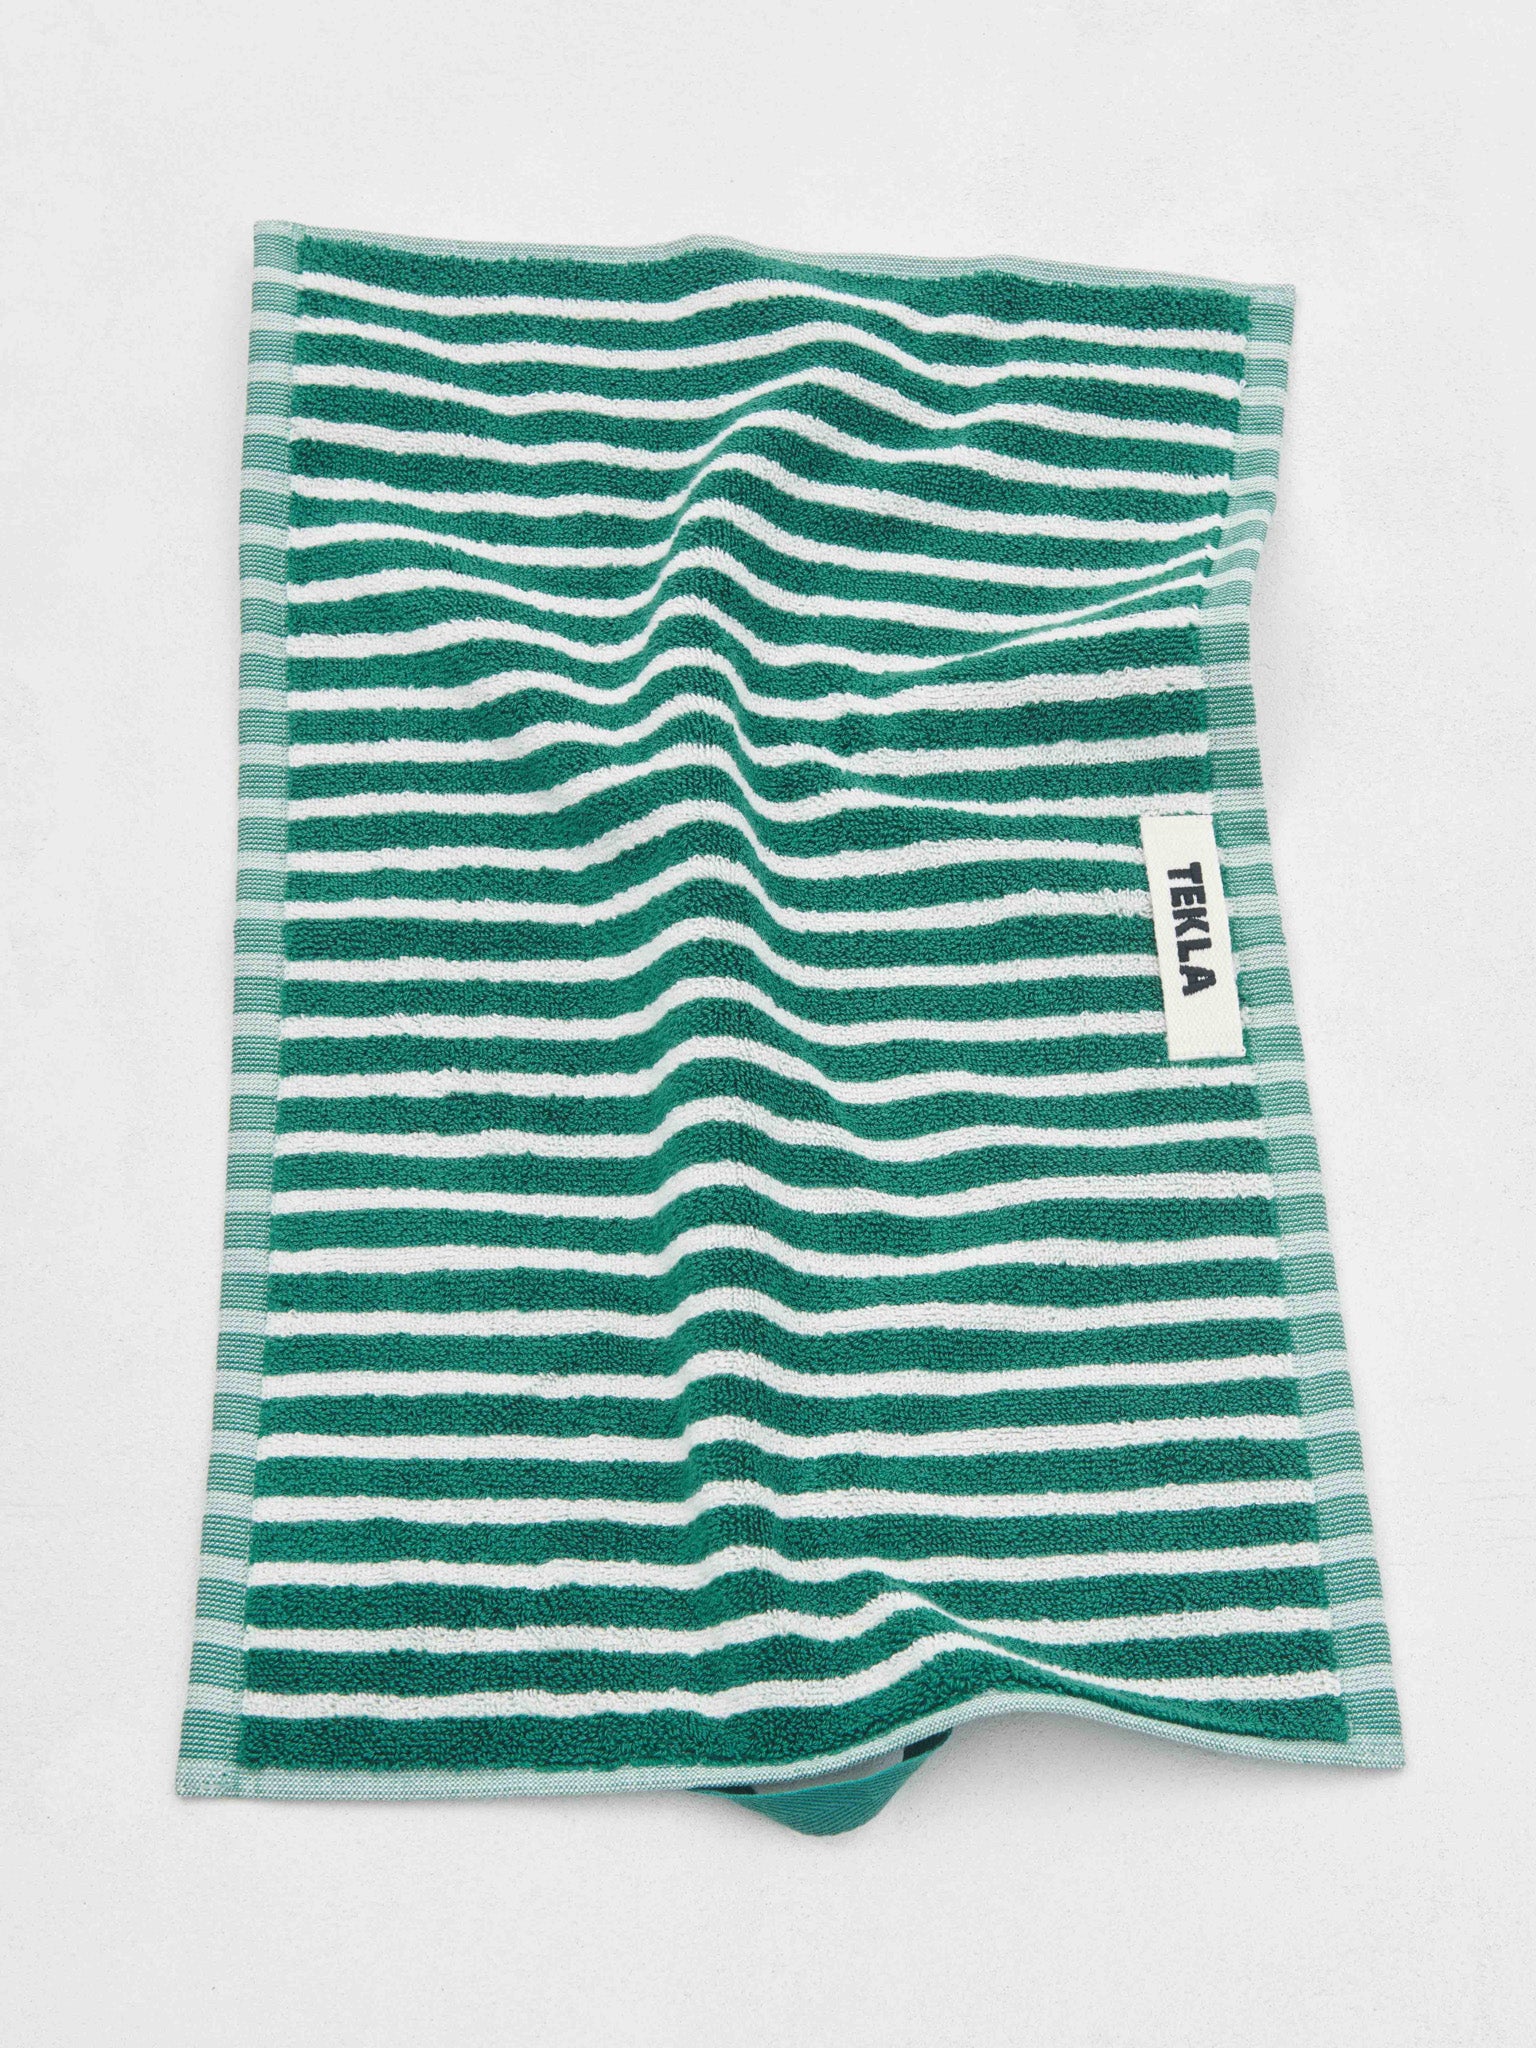 Guest Towel in Teal Green Stripes